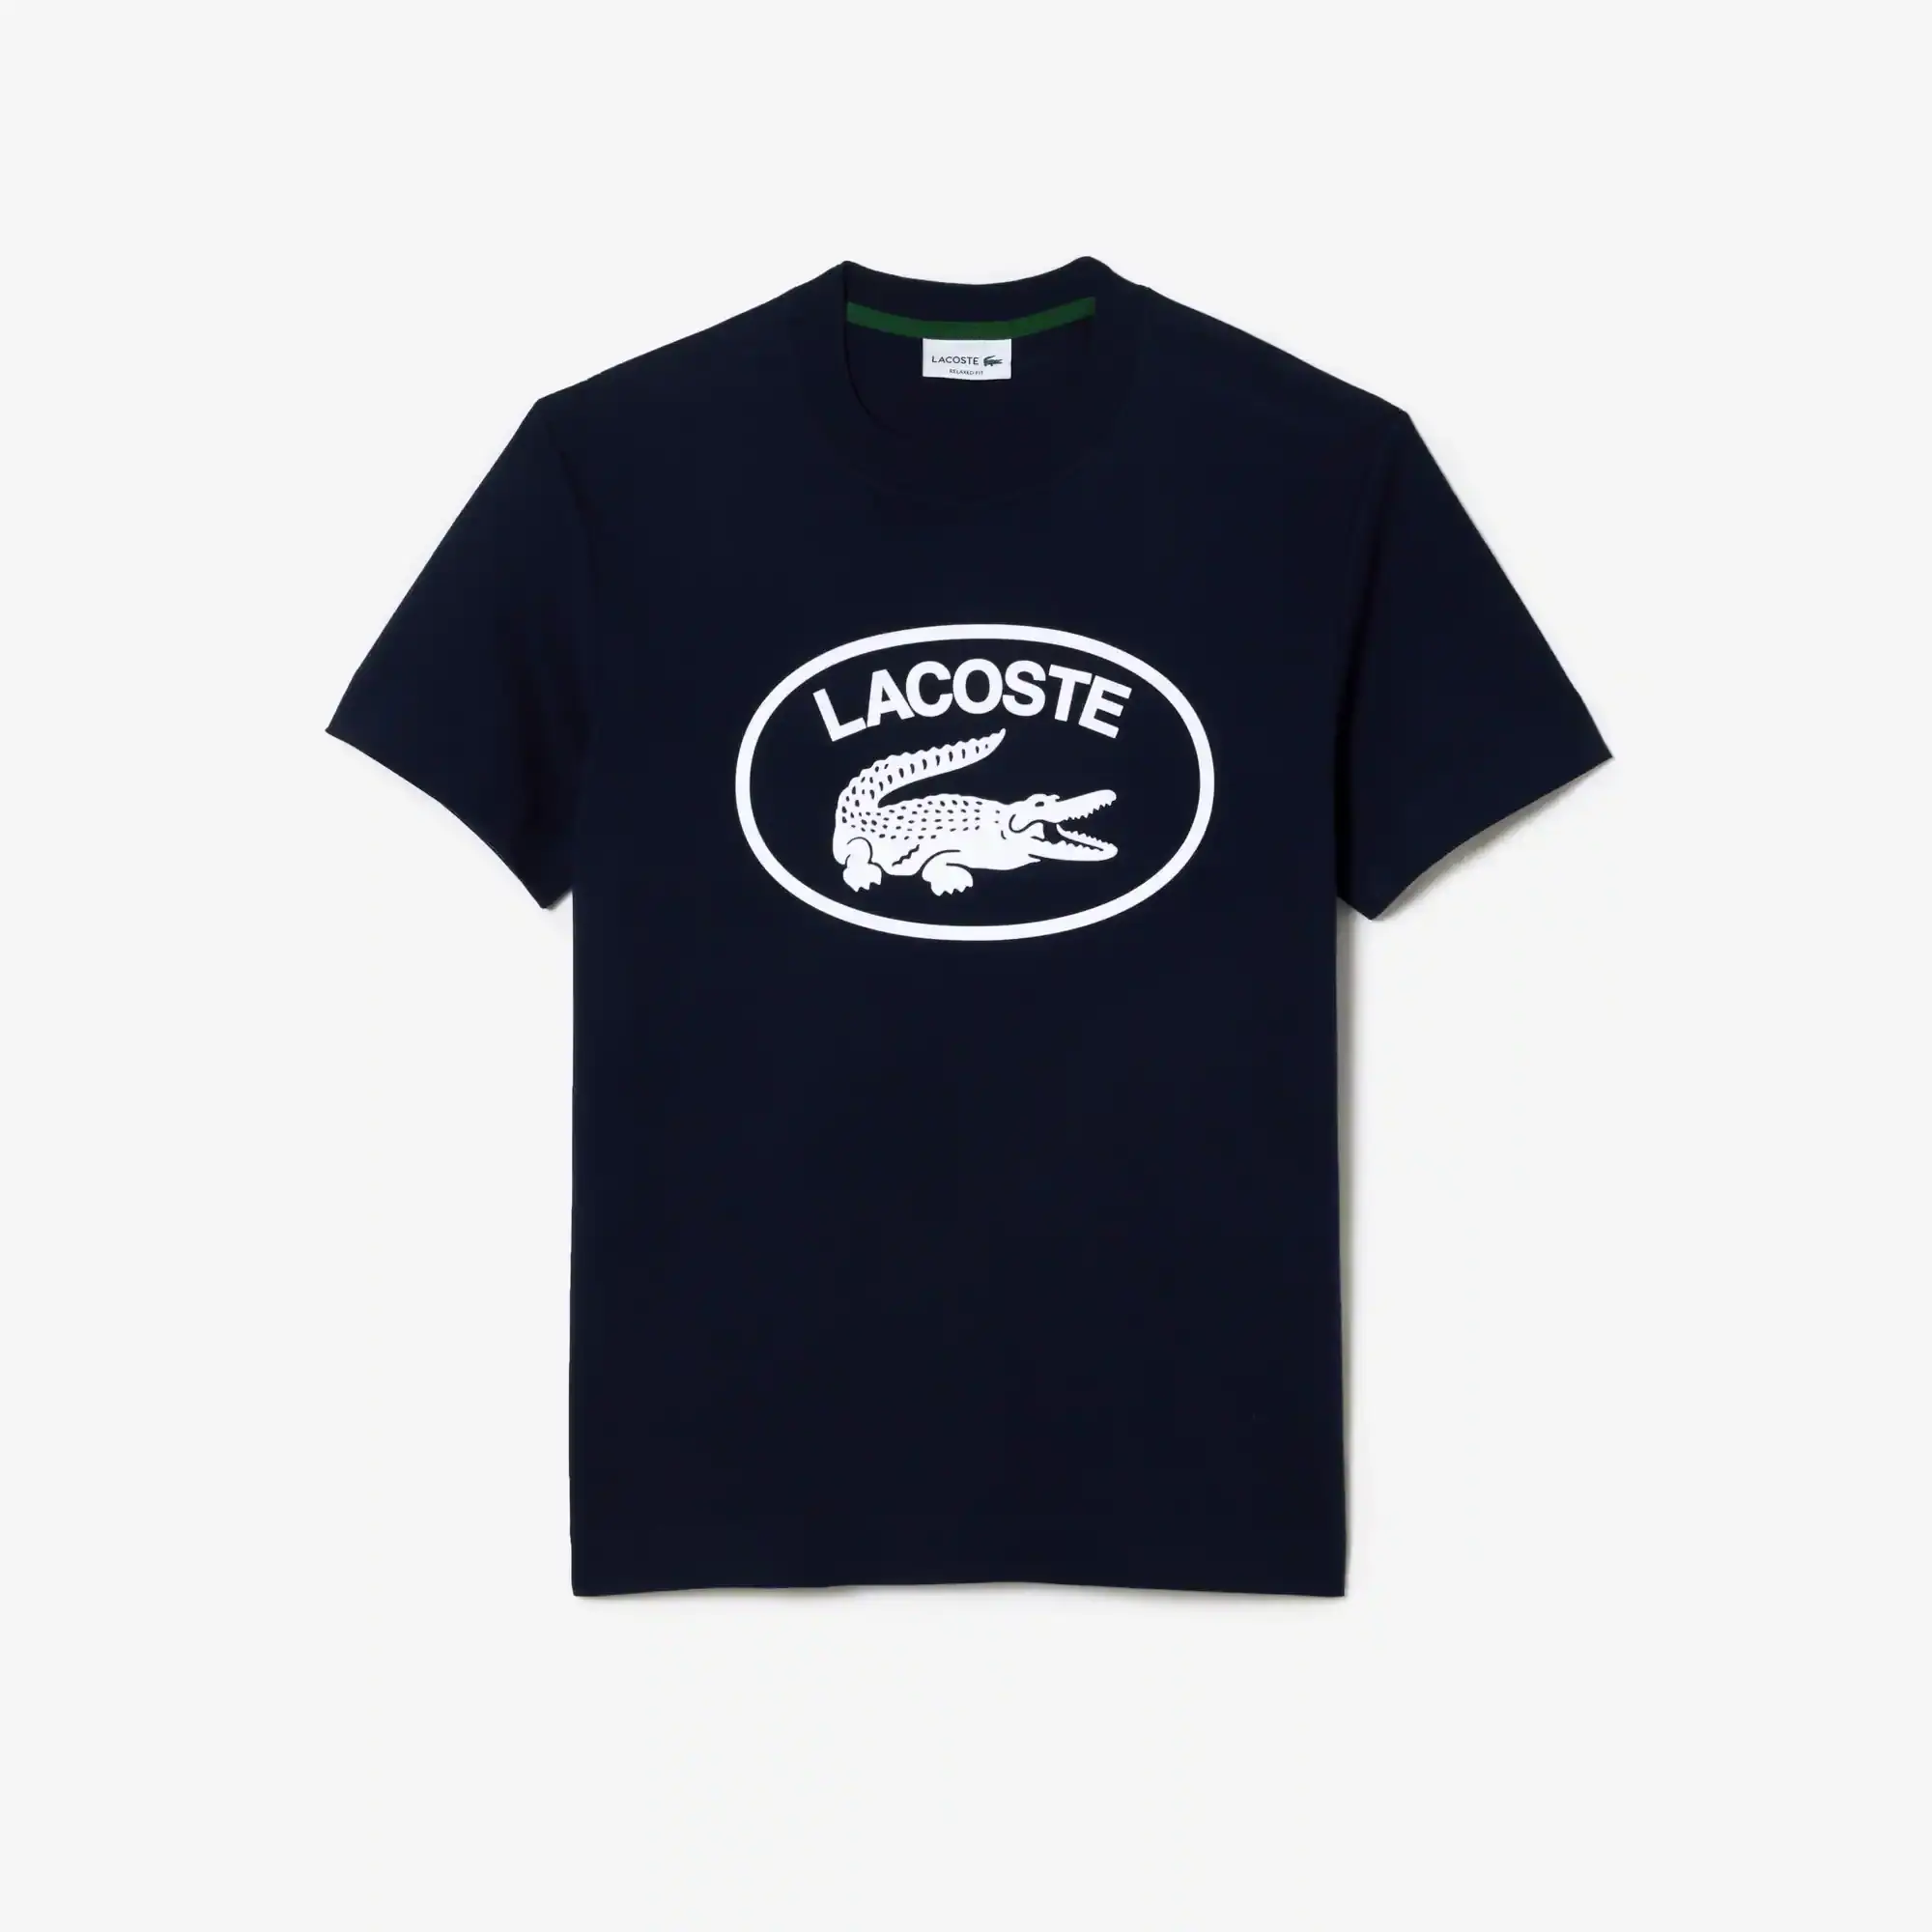 Lacoste Men's Relaxed Fit Branded Cotton T-Shirt. 2